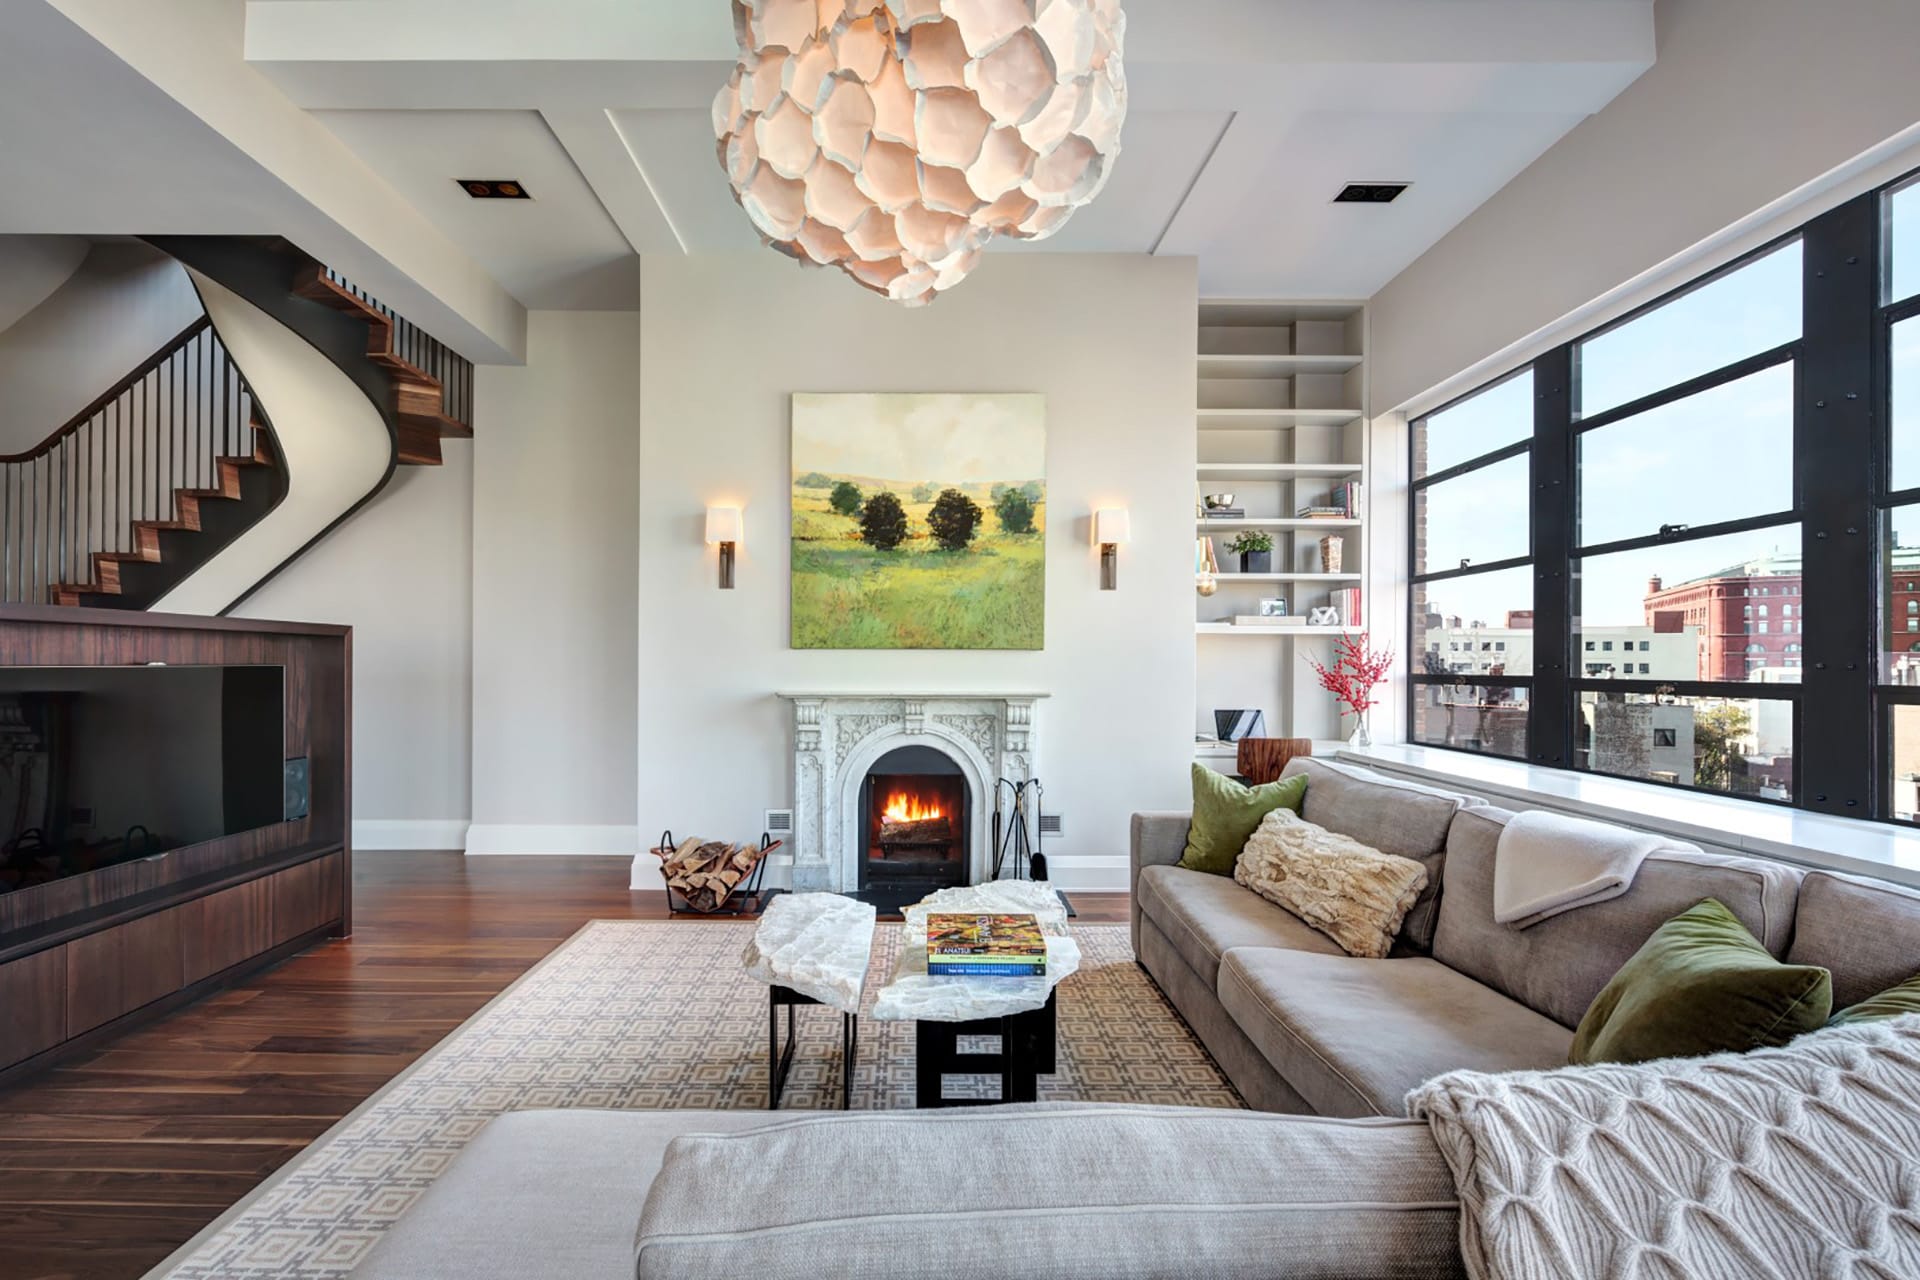 Living room with a large, artful chandelier, white fireplace, and sculptural stair in a West Village penthouse